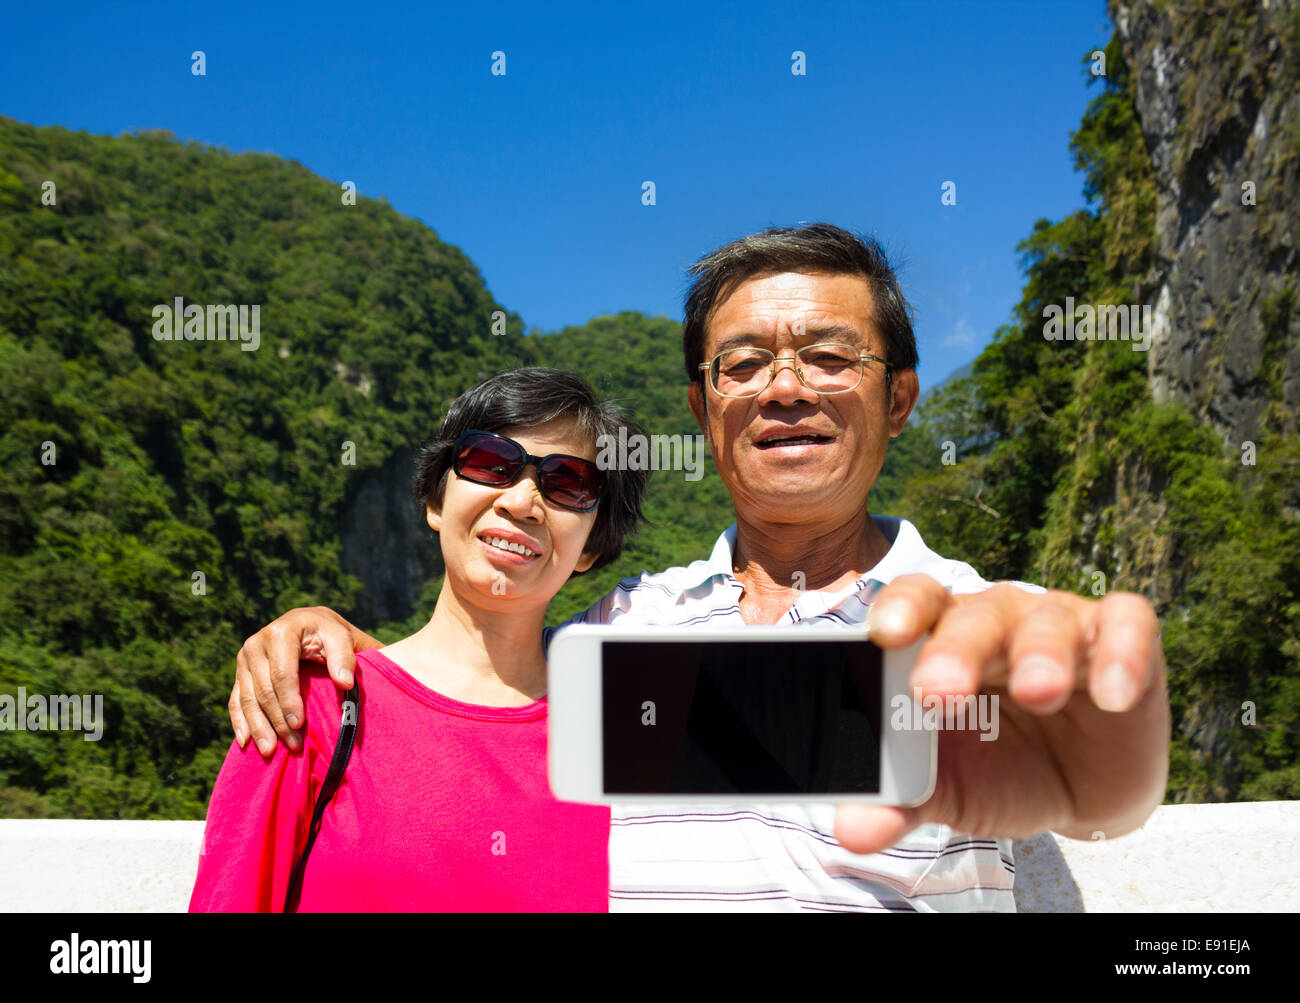 Senior couple taking picture of themselves outside with mountain background Stock Photo